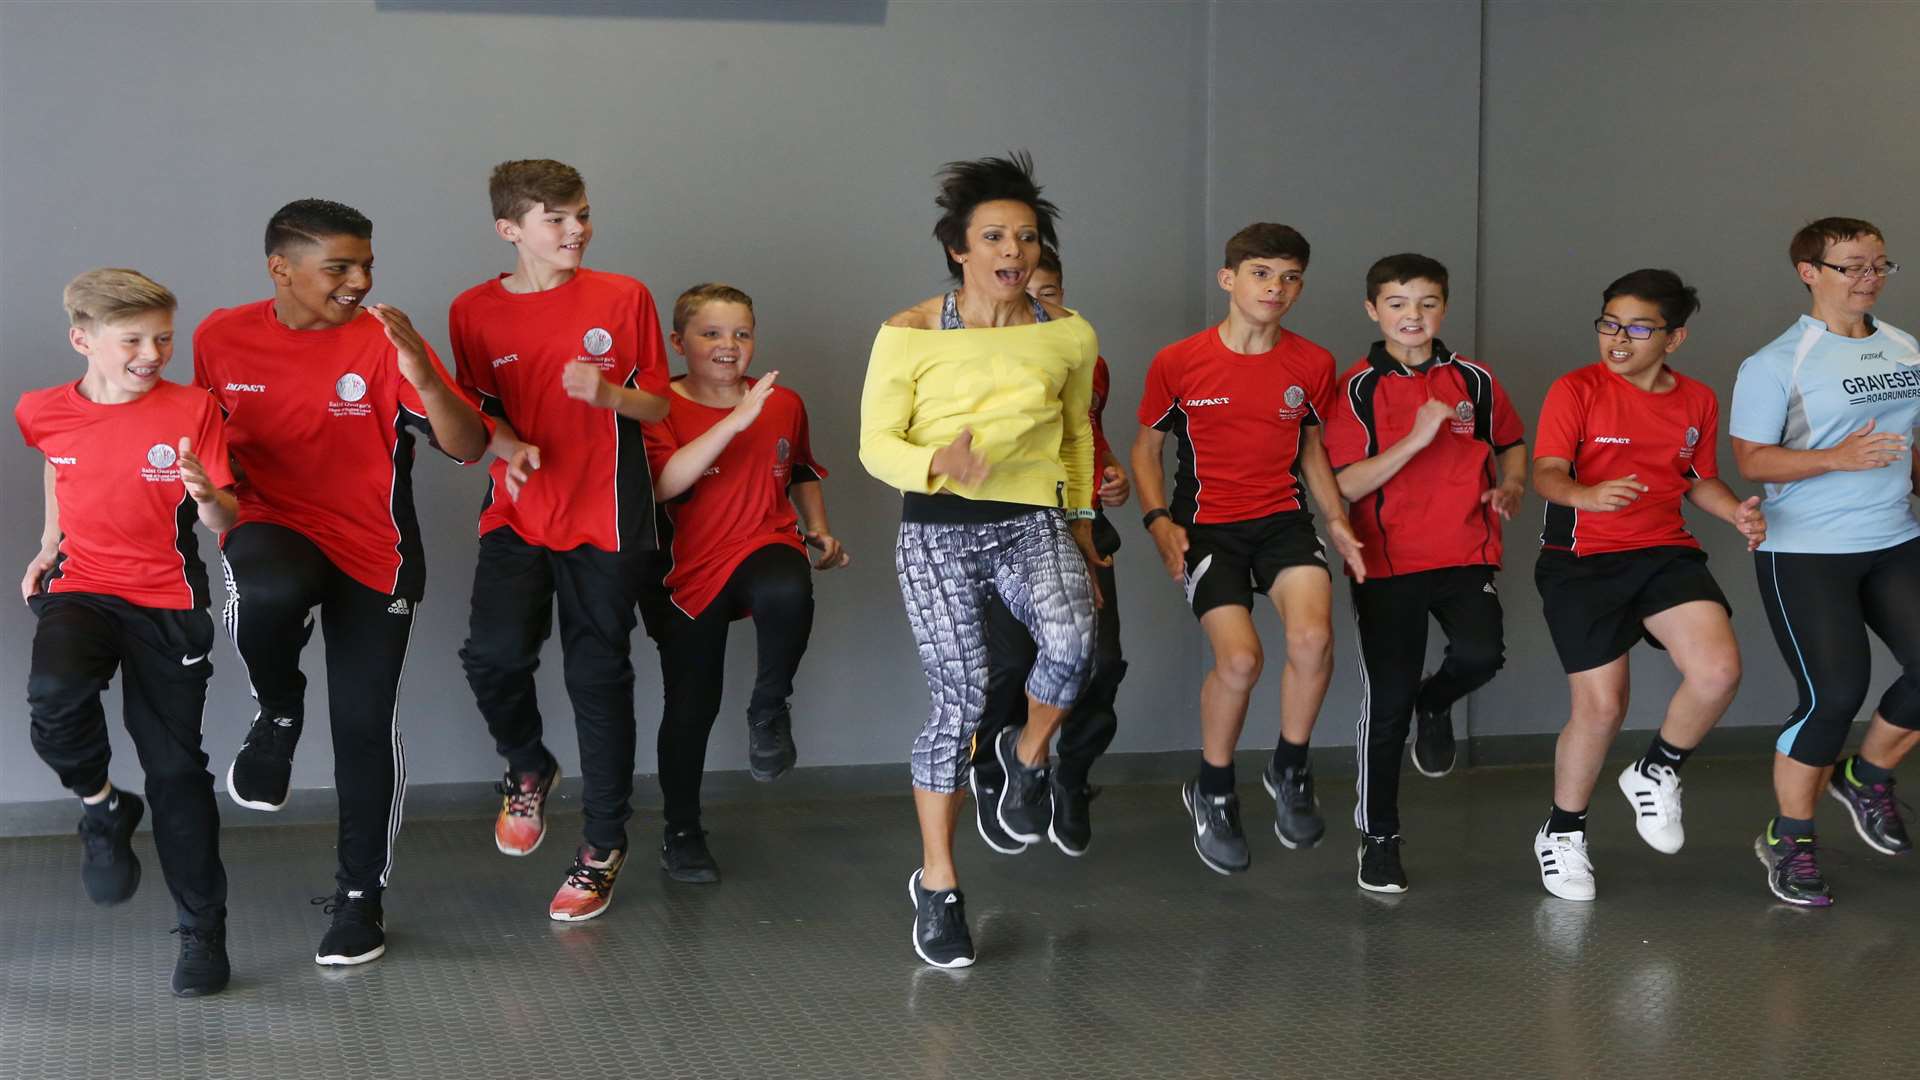 Dame Kelly leads an exercise session with her guests, including pupils from Saint George's School. Picture: John Westhrop